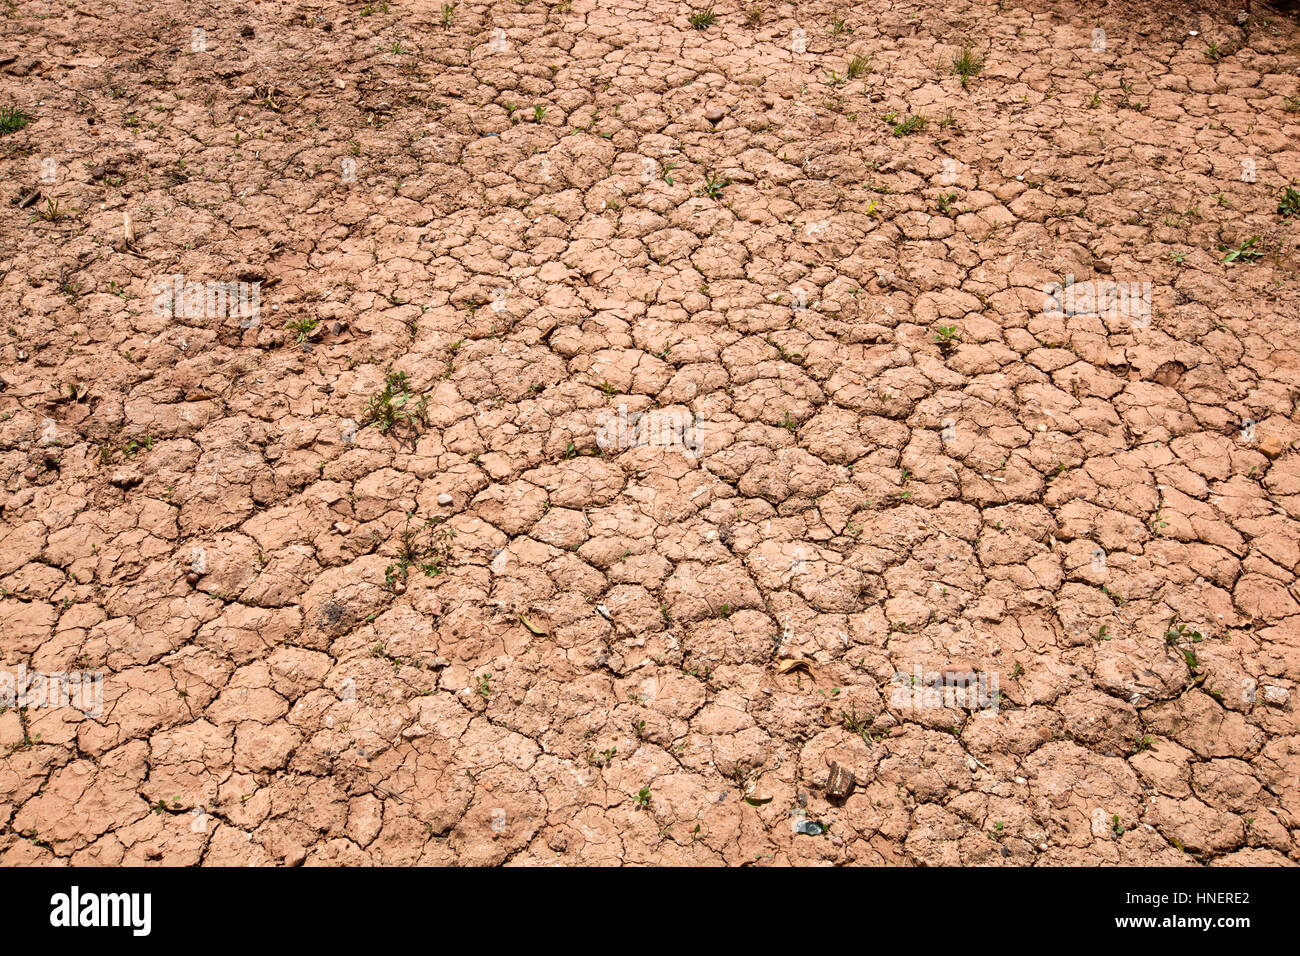 Dry cracked red soil Stock Photo